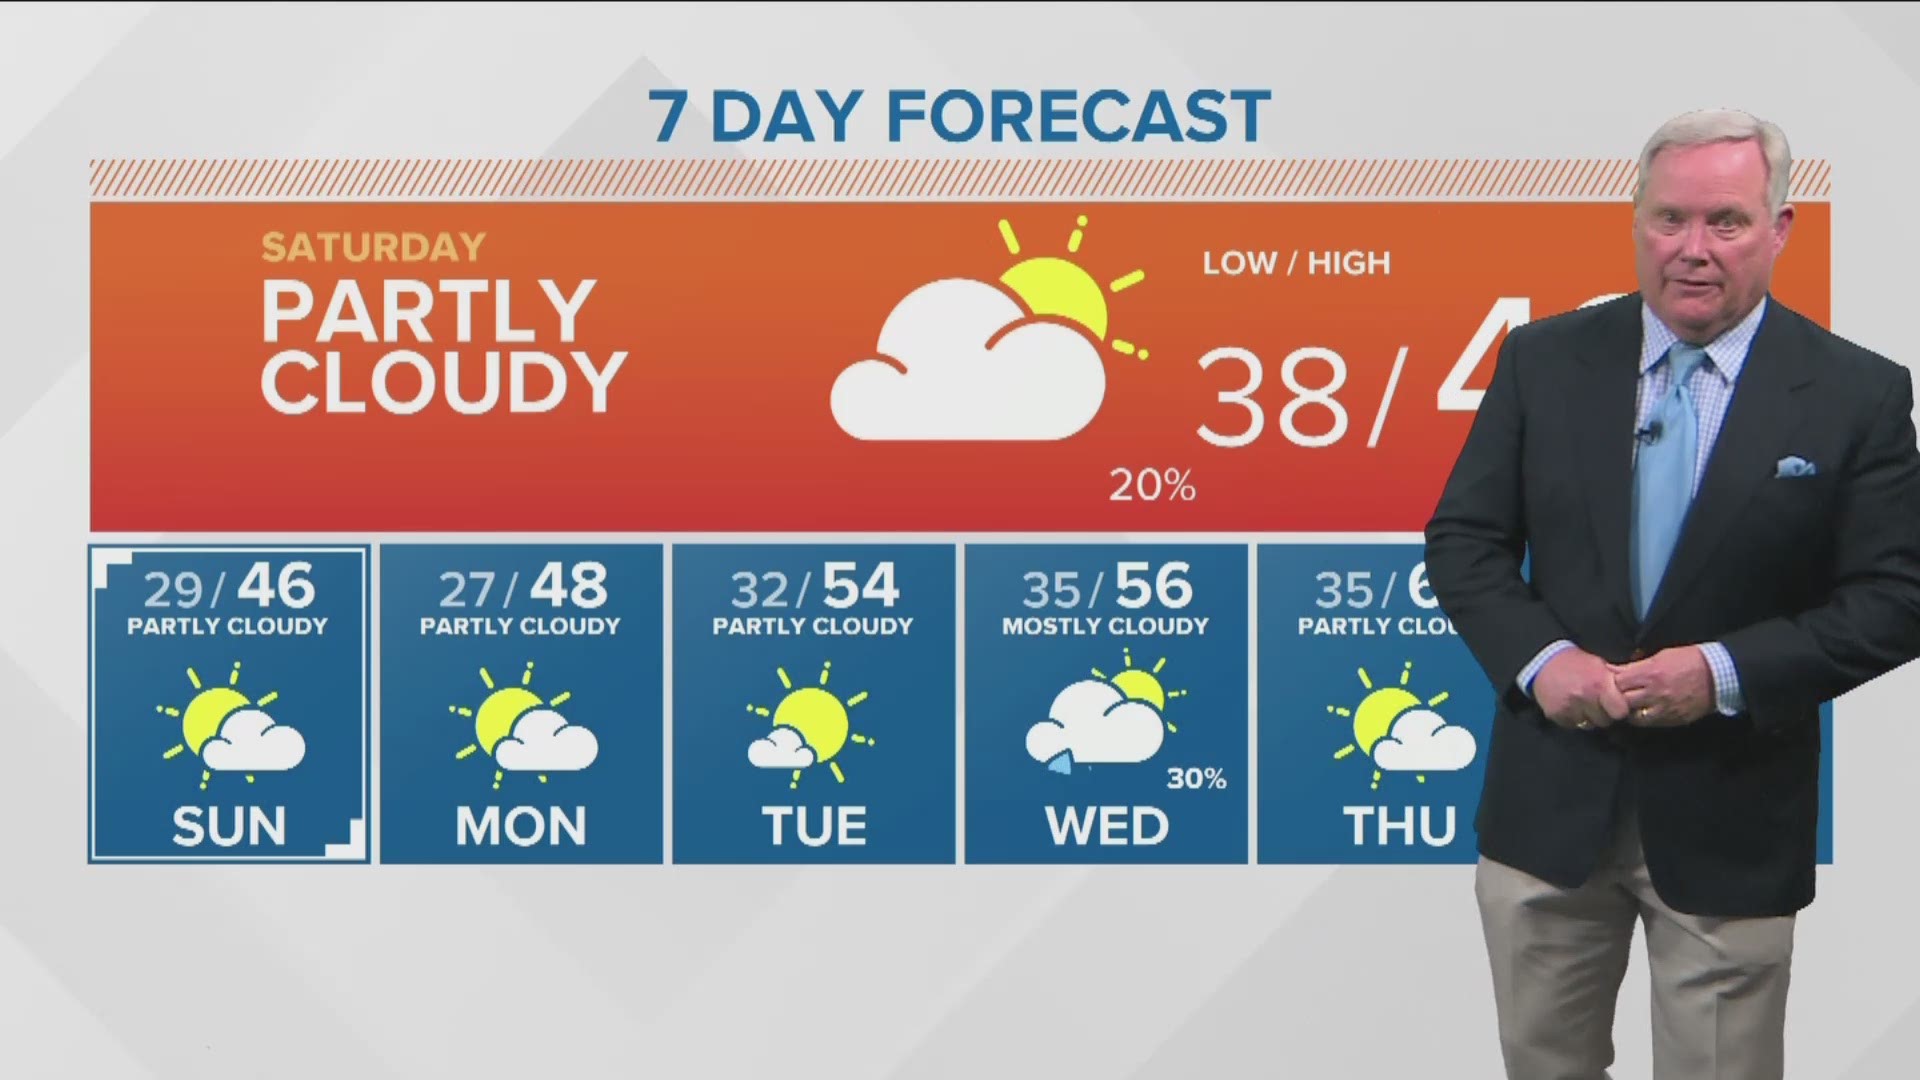 Rick Lantz says it will cooling down a bit for the weekend. Highs in the upper 40s.